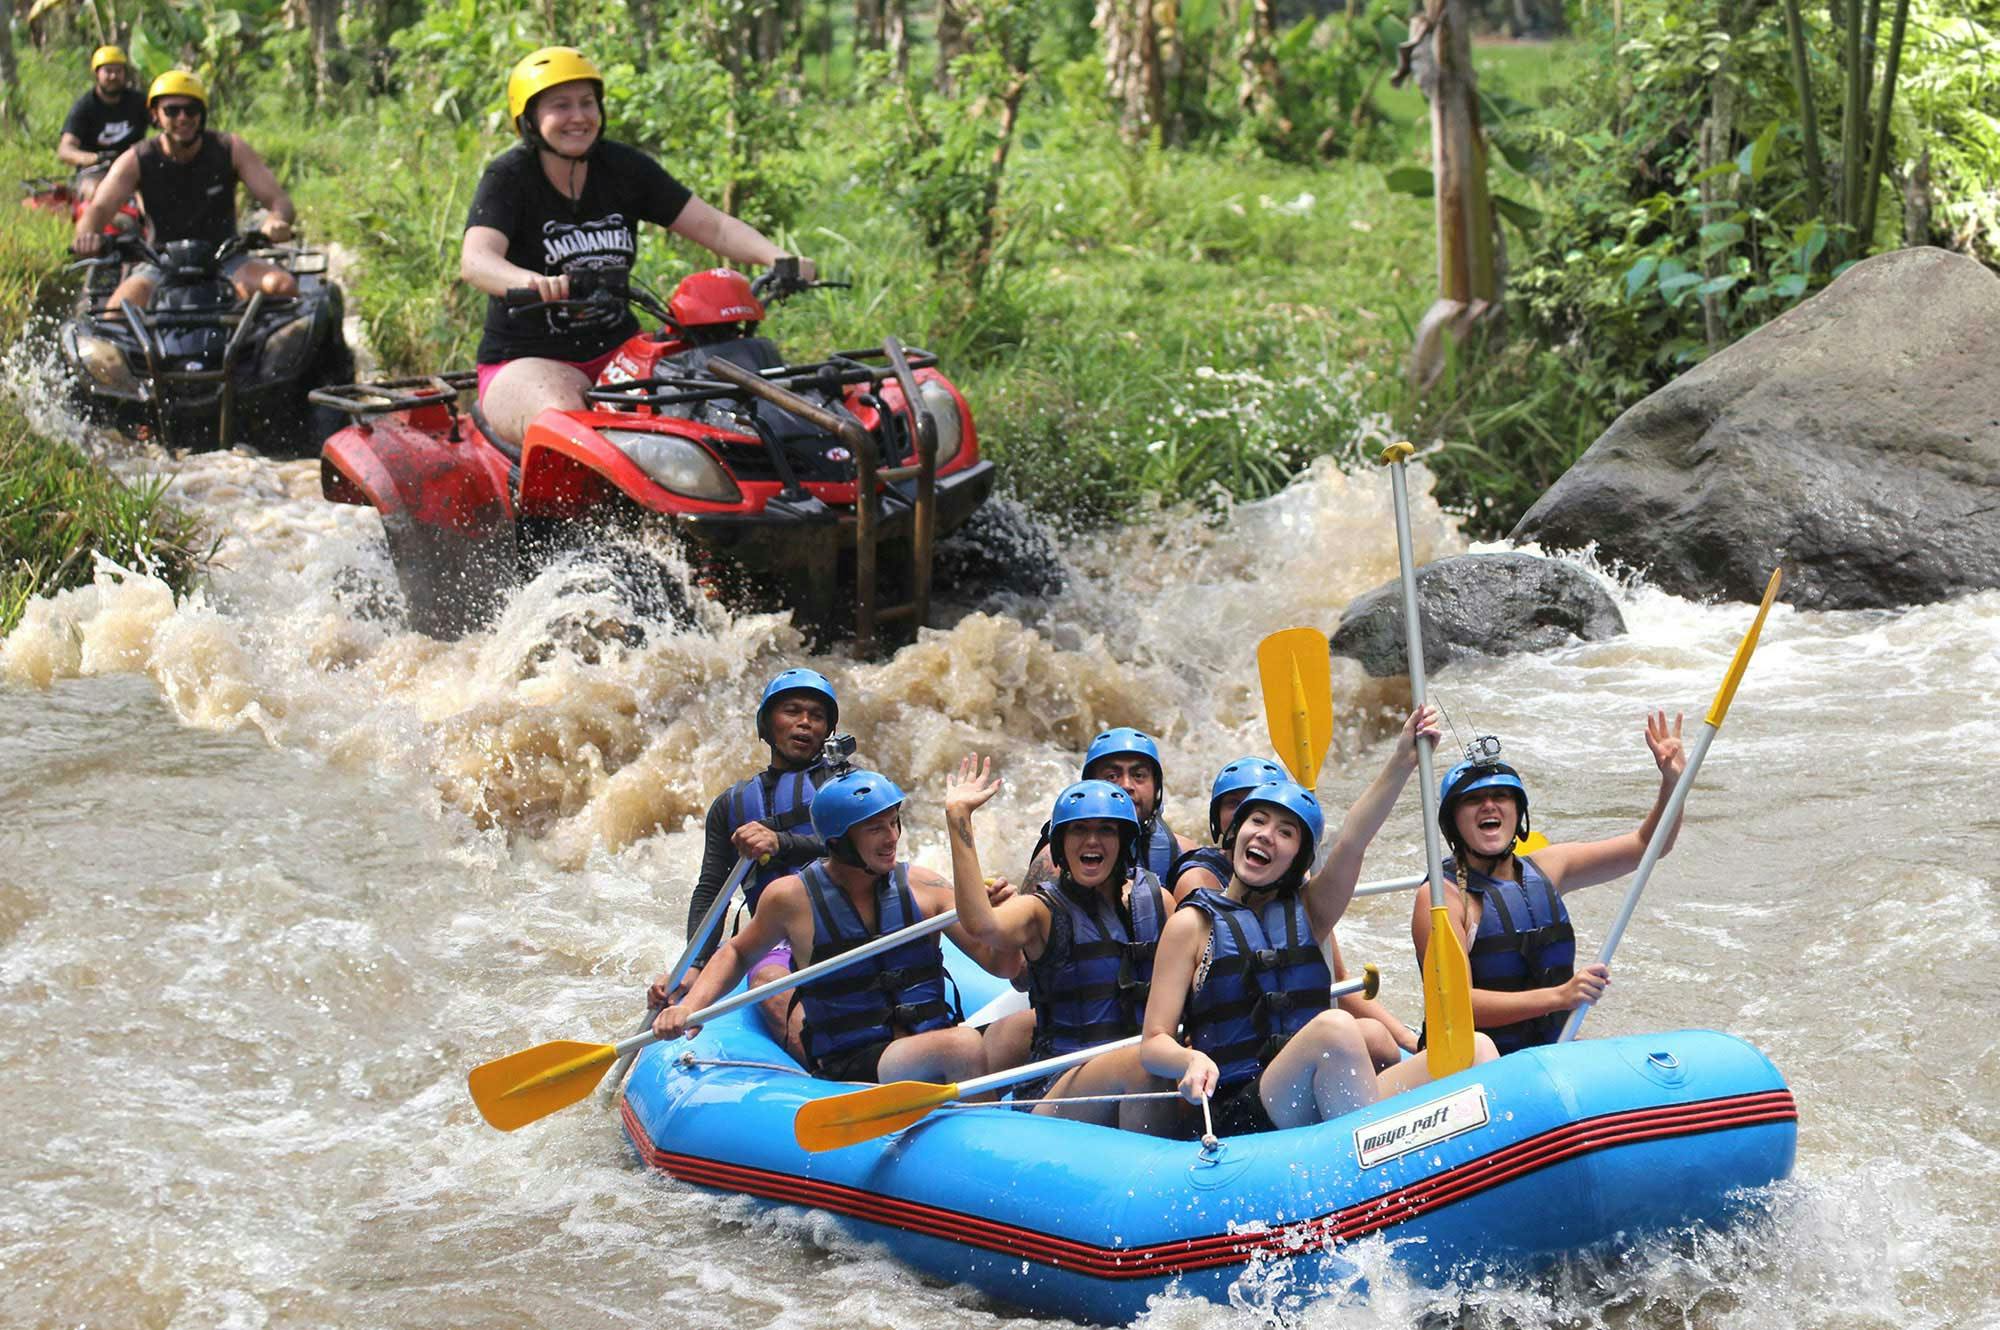 Bali outdoor adventure with quad bikes and rafting Musement